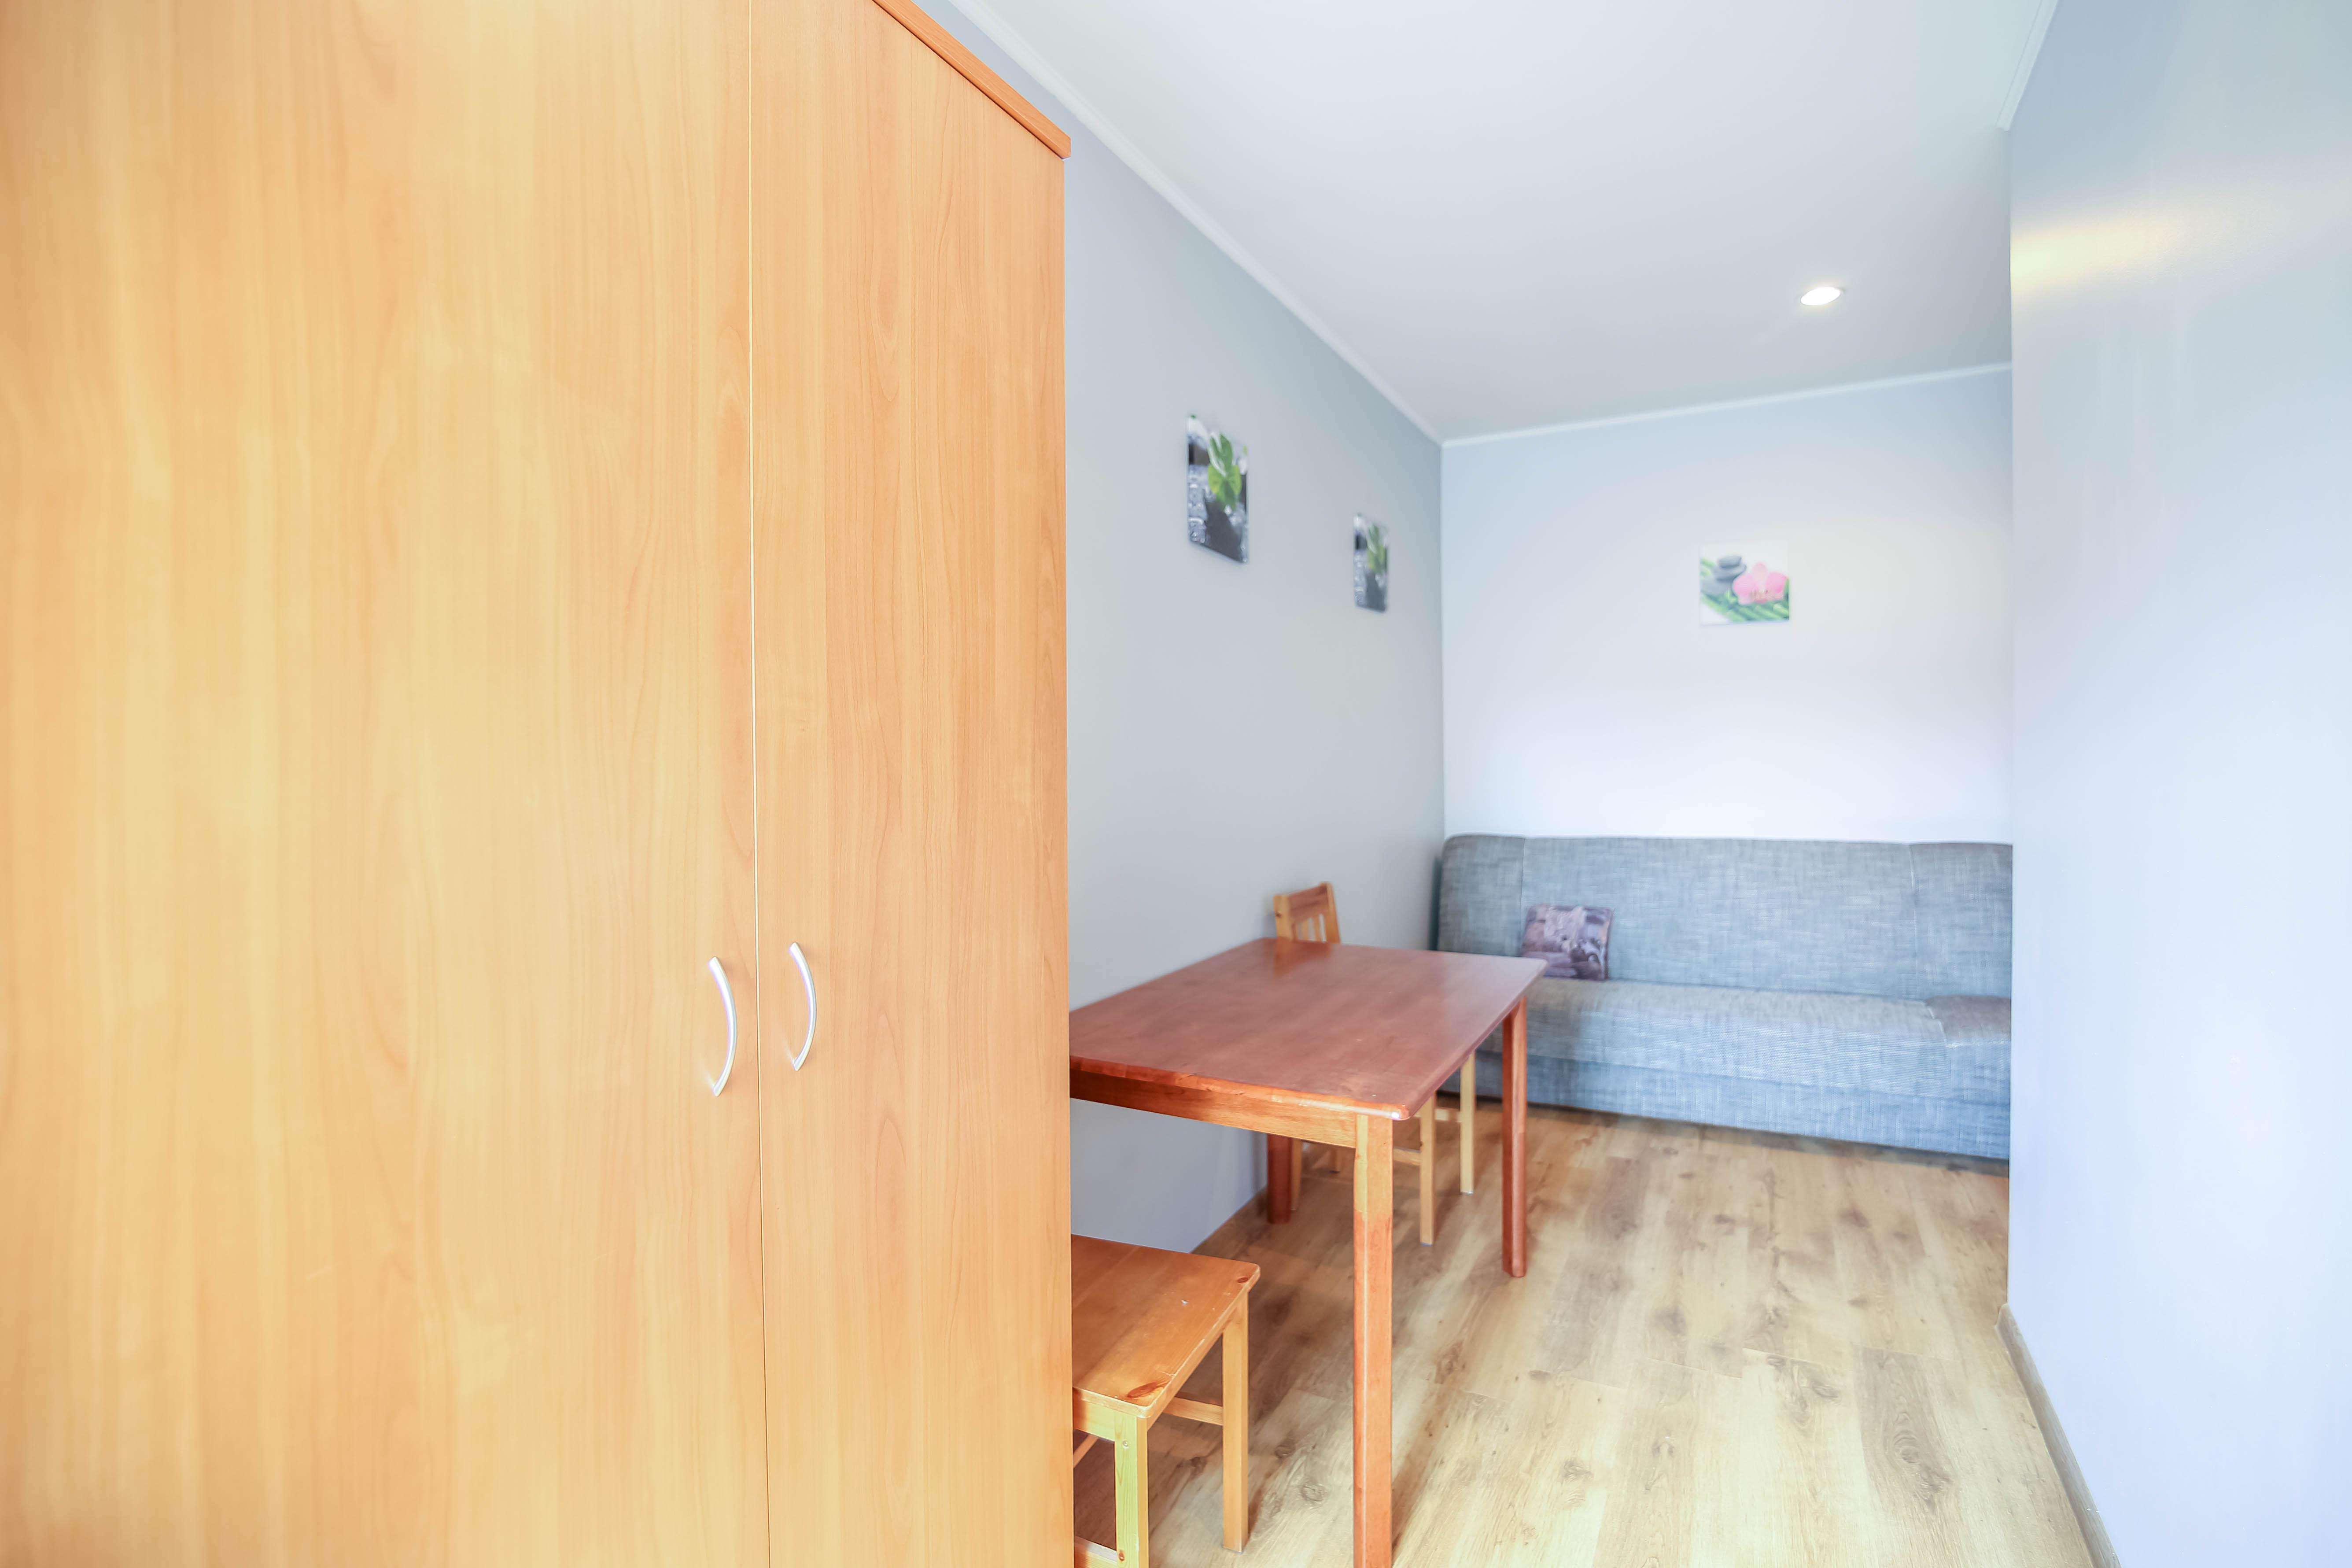 Apartment for sale, Ģertrūdes street 135 - Image 1